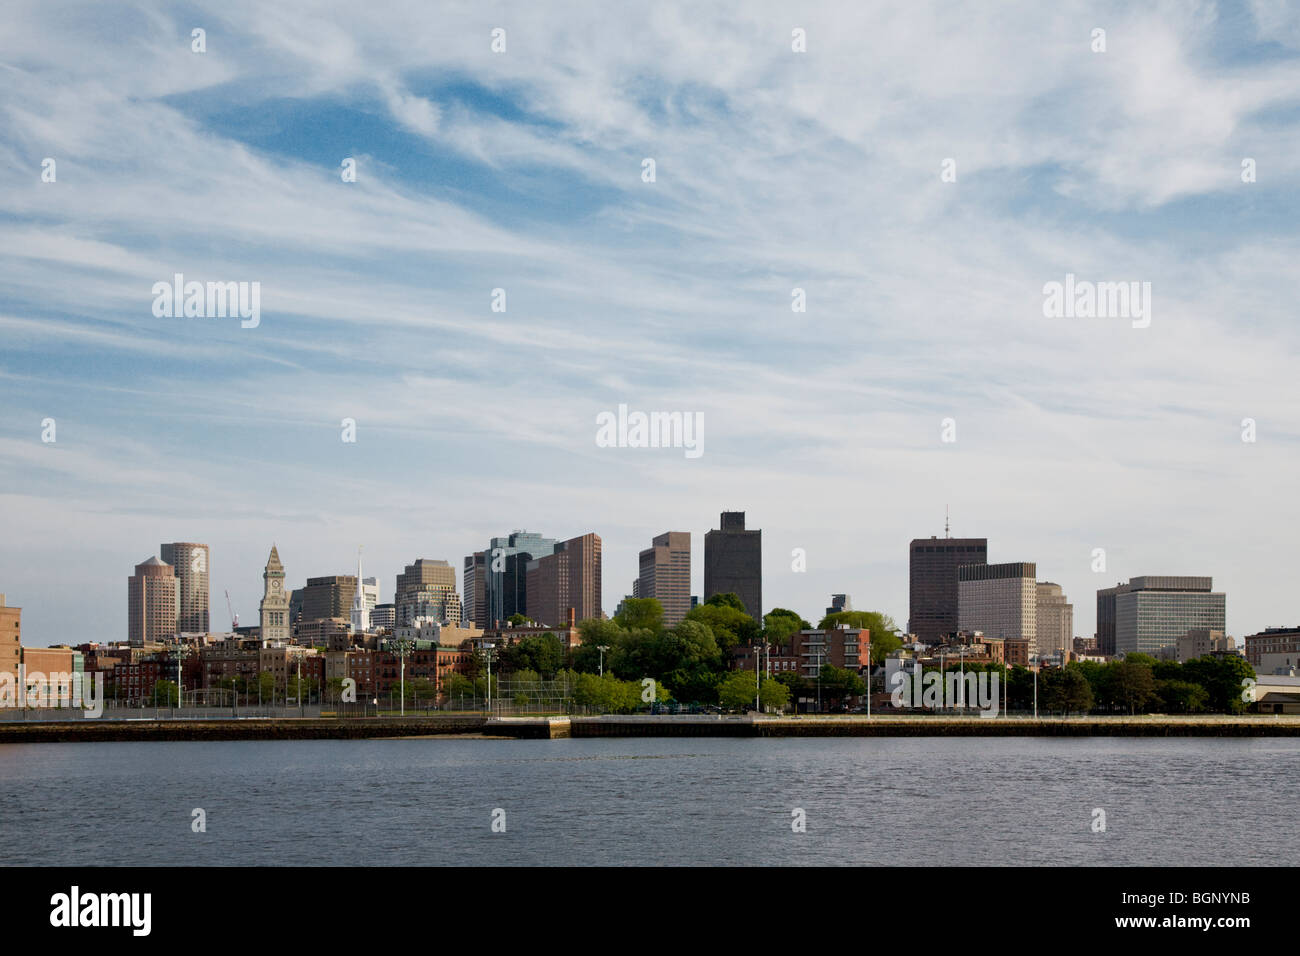 The BOSTON SKYLINE as seen from the CHARLES RIVER - MASSACHUSETTS Stock Photo